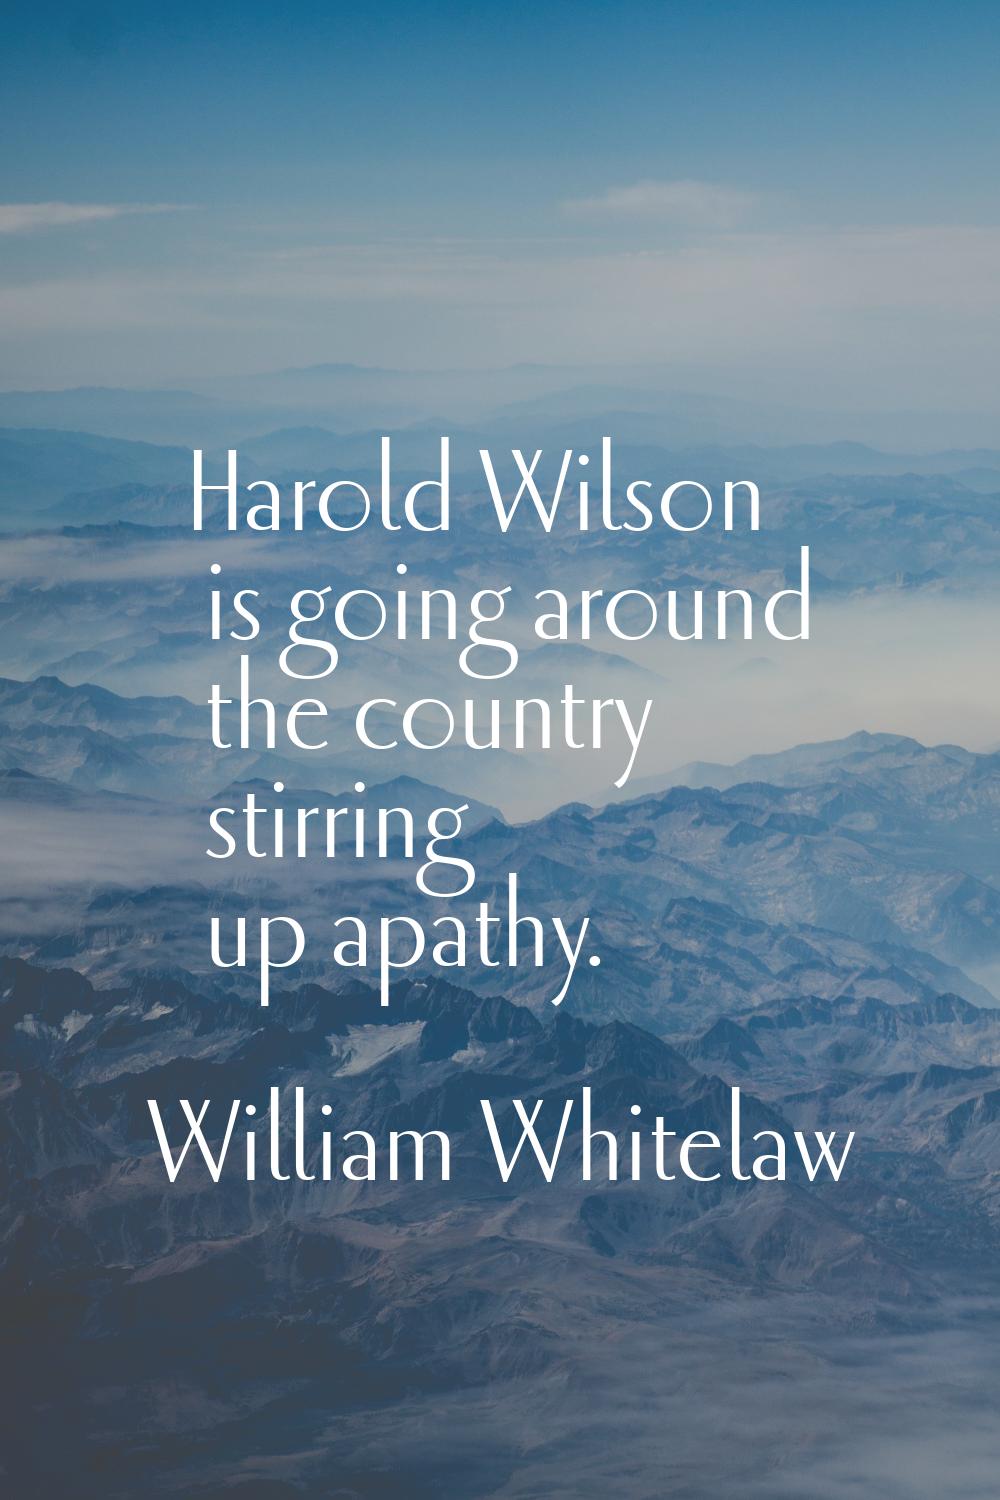 Harold Wilson is going around the country stirring up apathy.